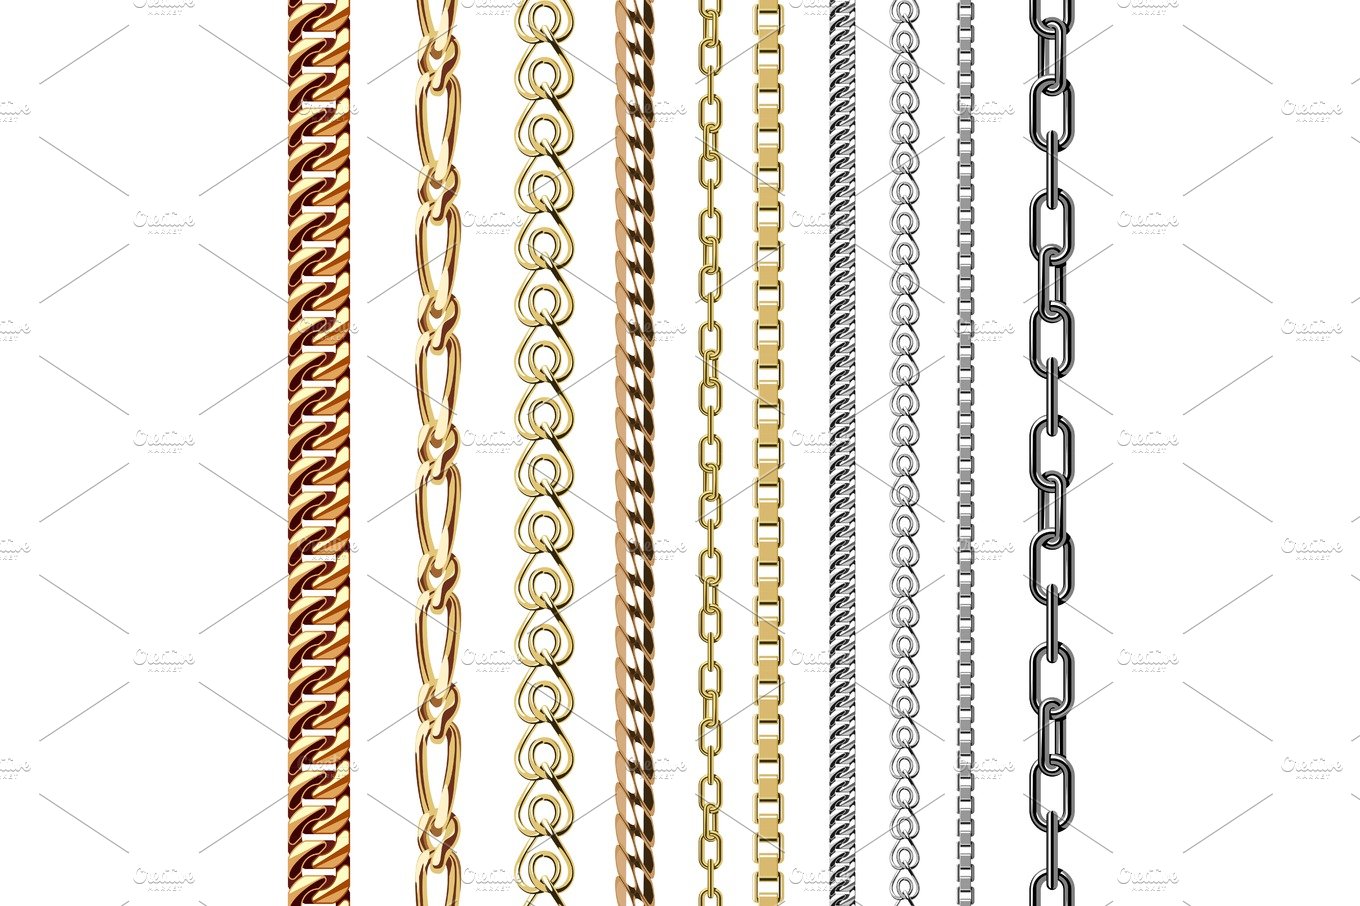 Chains link strength connection vector seamless pattern of metal linked par... cover image.